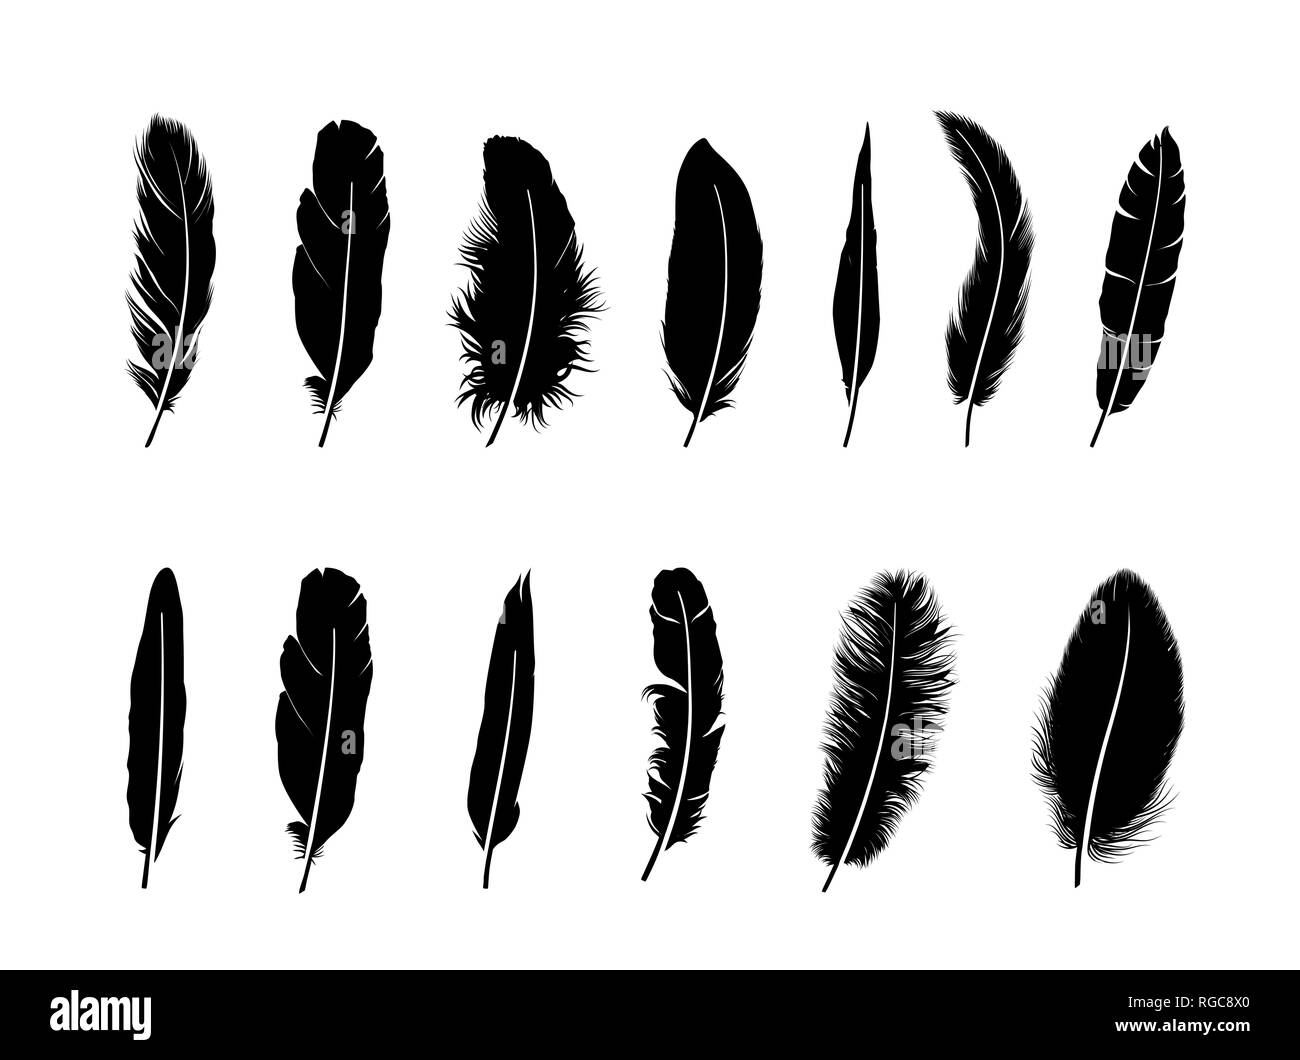 Feather set. Drawn illustration of different  birds feathers isolated over white background Stock Vector